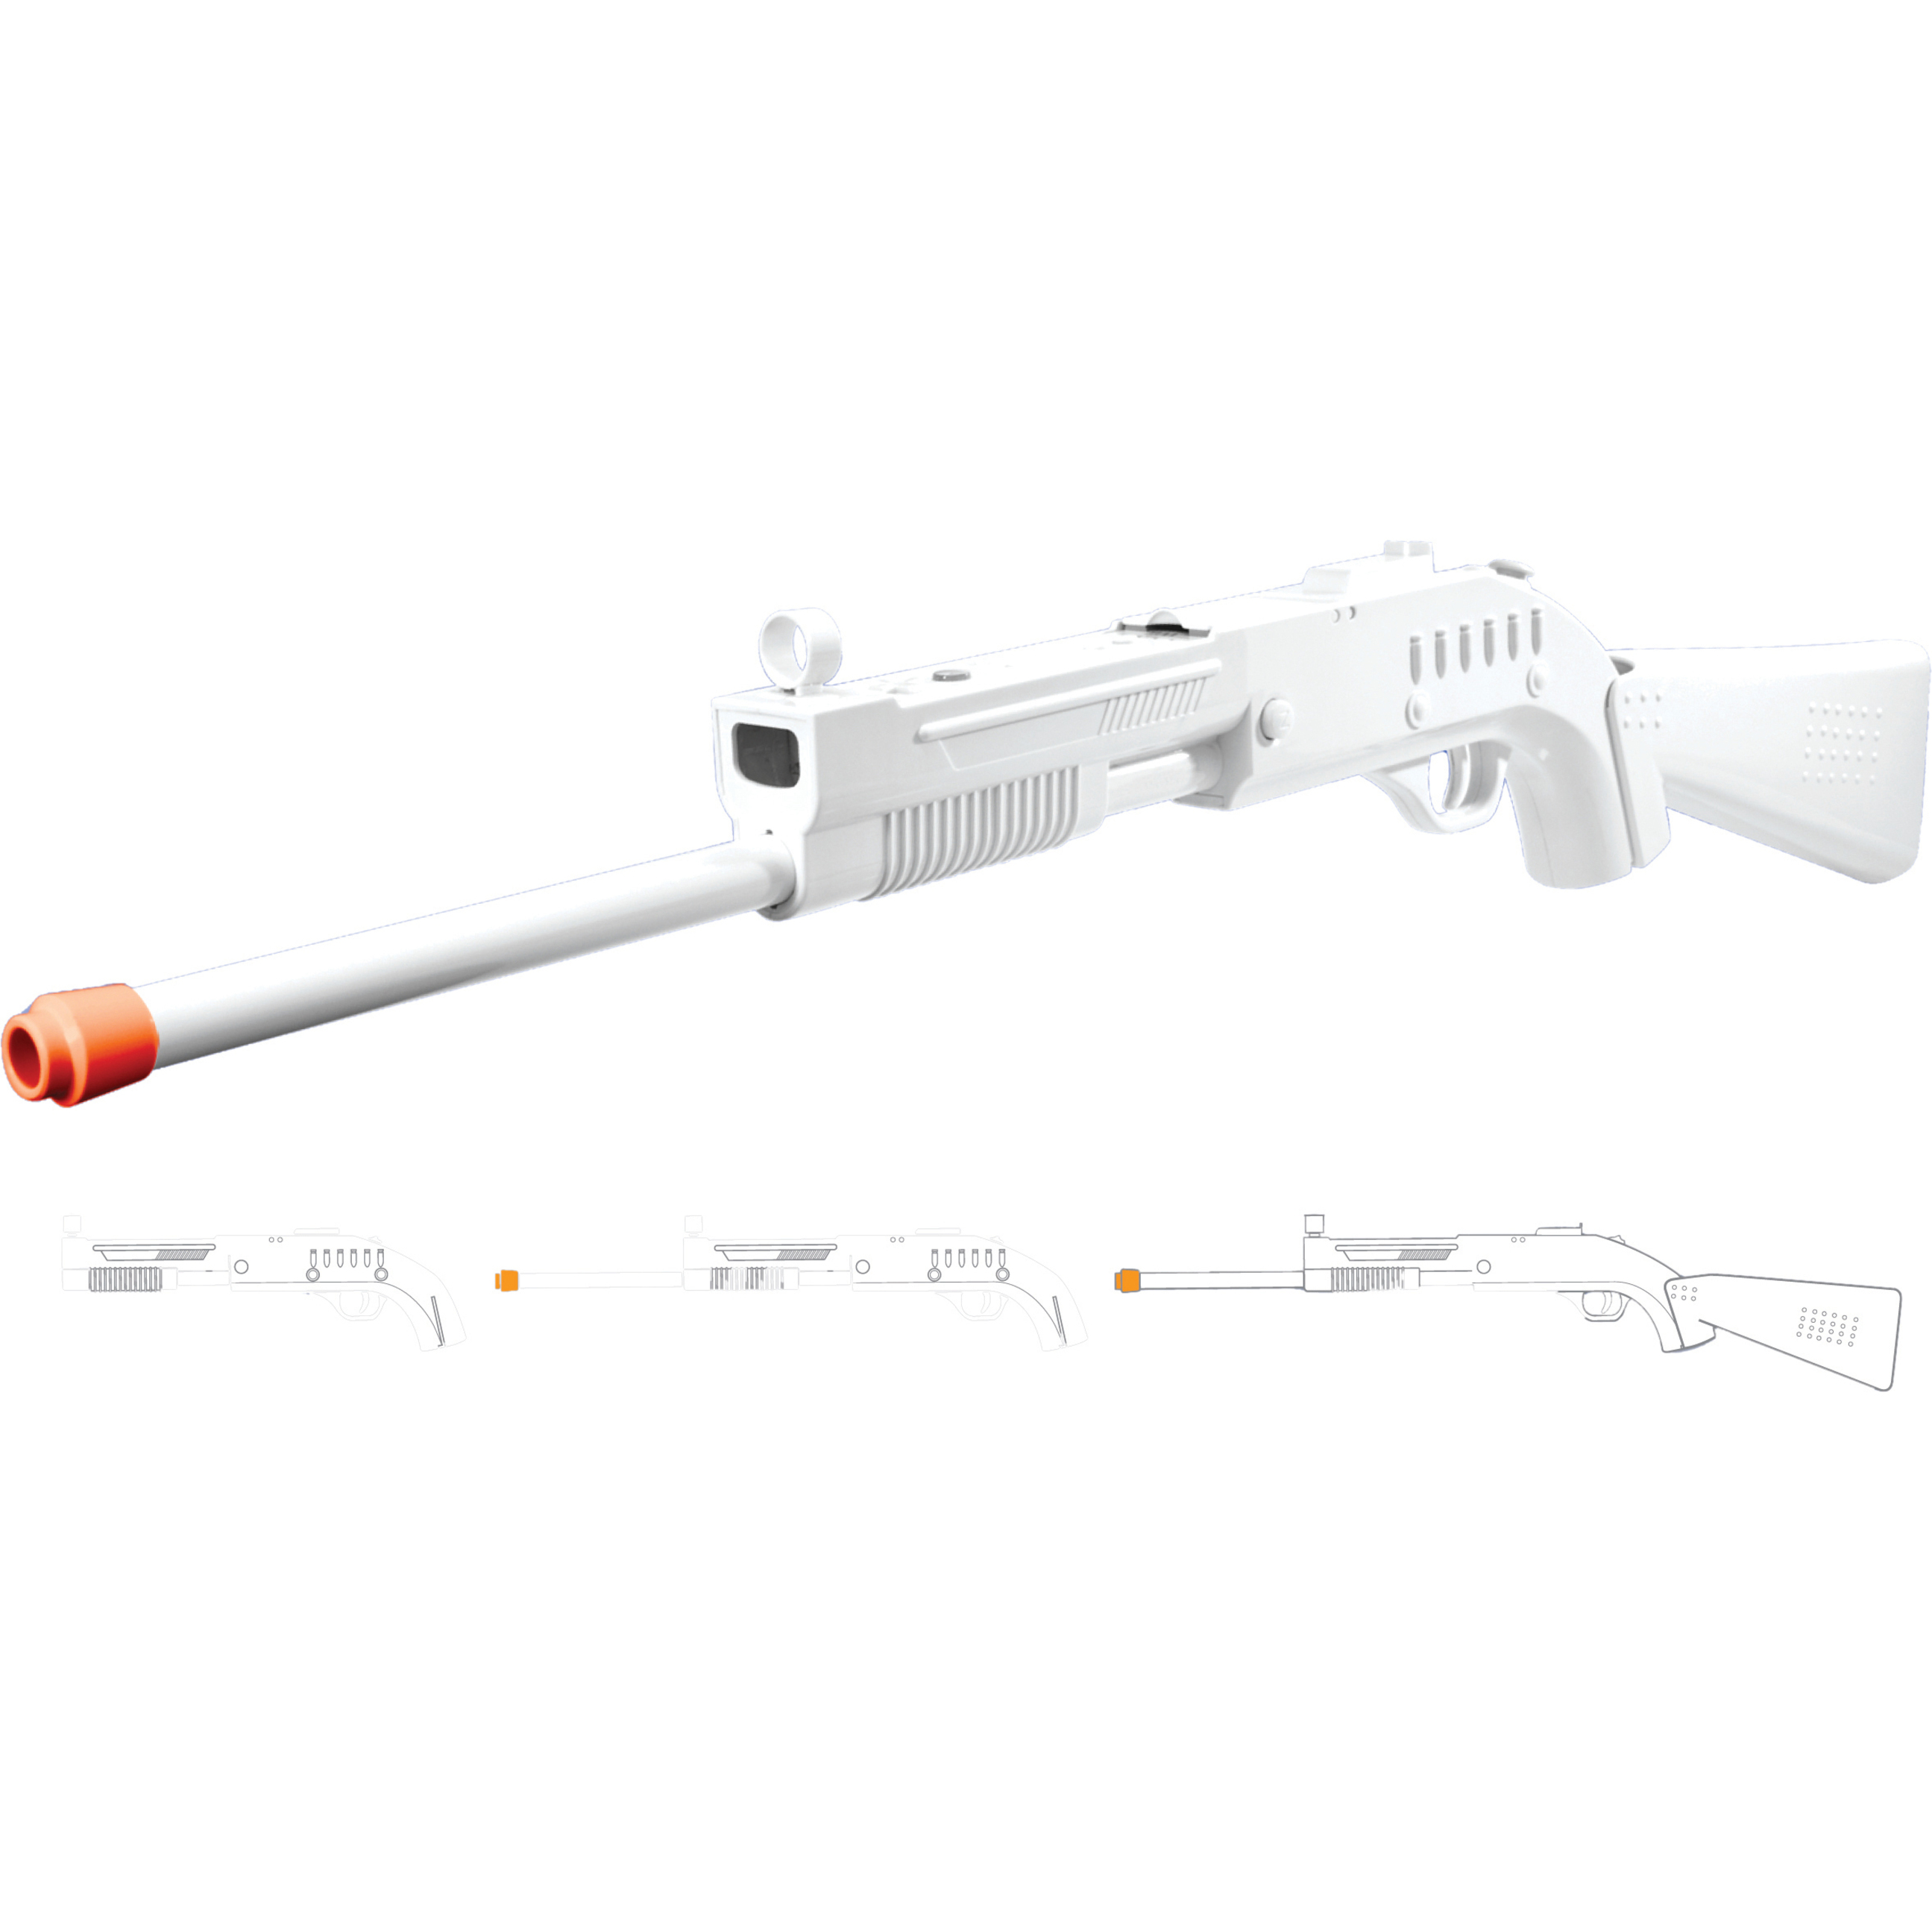 CTA Digital Sure Shot Rifle for Wii - image 3 of 3